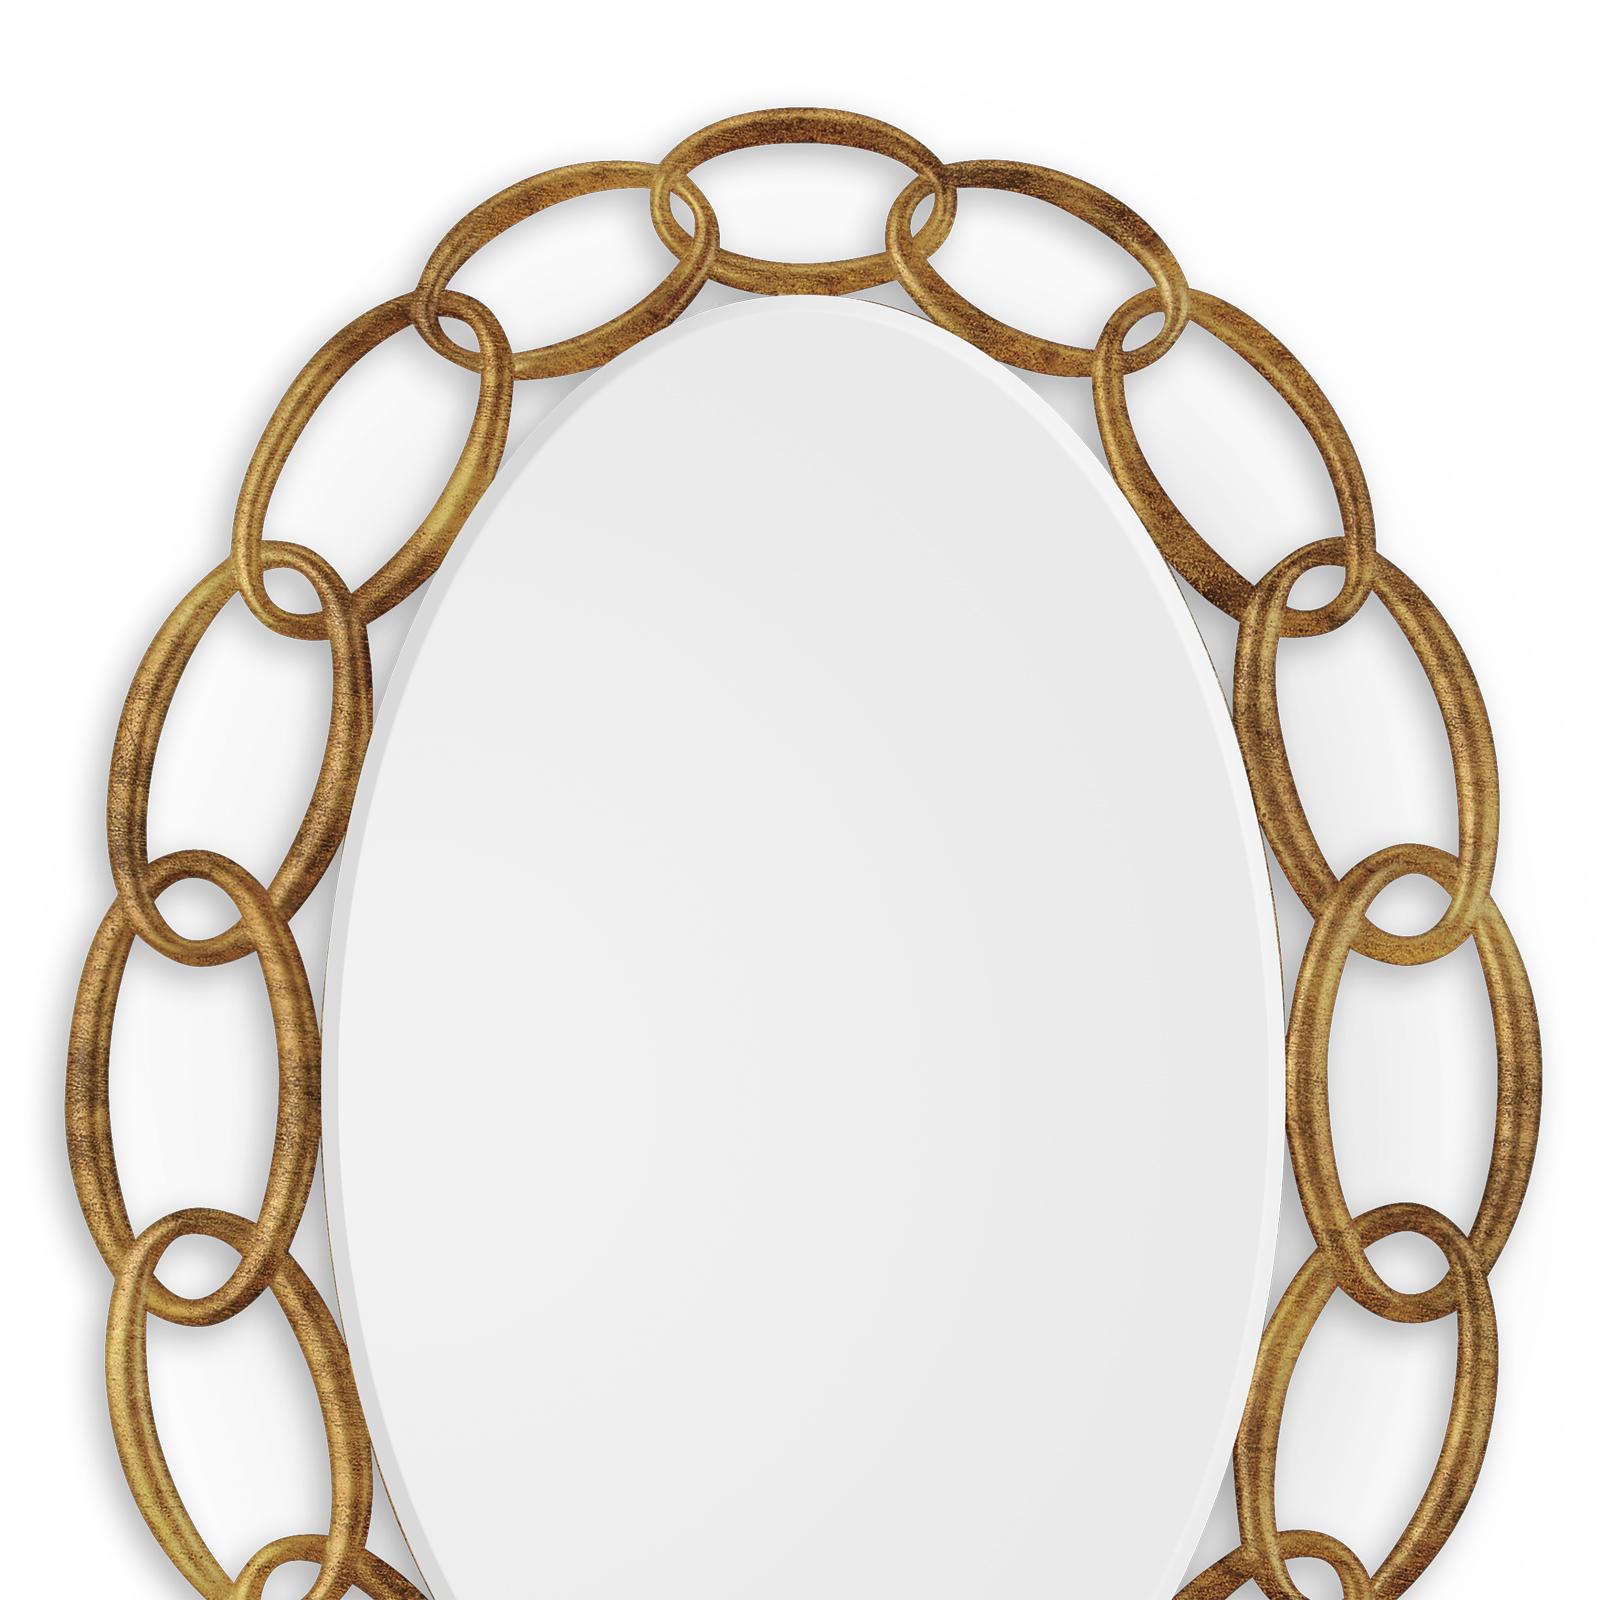 Mirror chain with frame in solid hand-carved
wood in antique gold finish. With bevelled
oval mirror glass.
Available in: in antique silver, red, black
or tobacco finishes.
Available in:
L 77 x D 04 x H 102 cm. Price: 2950,00€.
L 92 x D 04 x H 122cm.